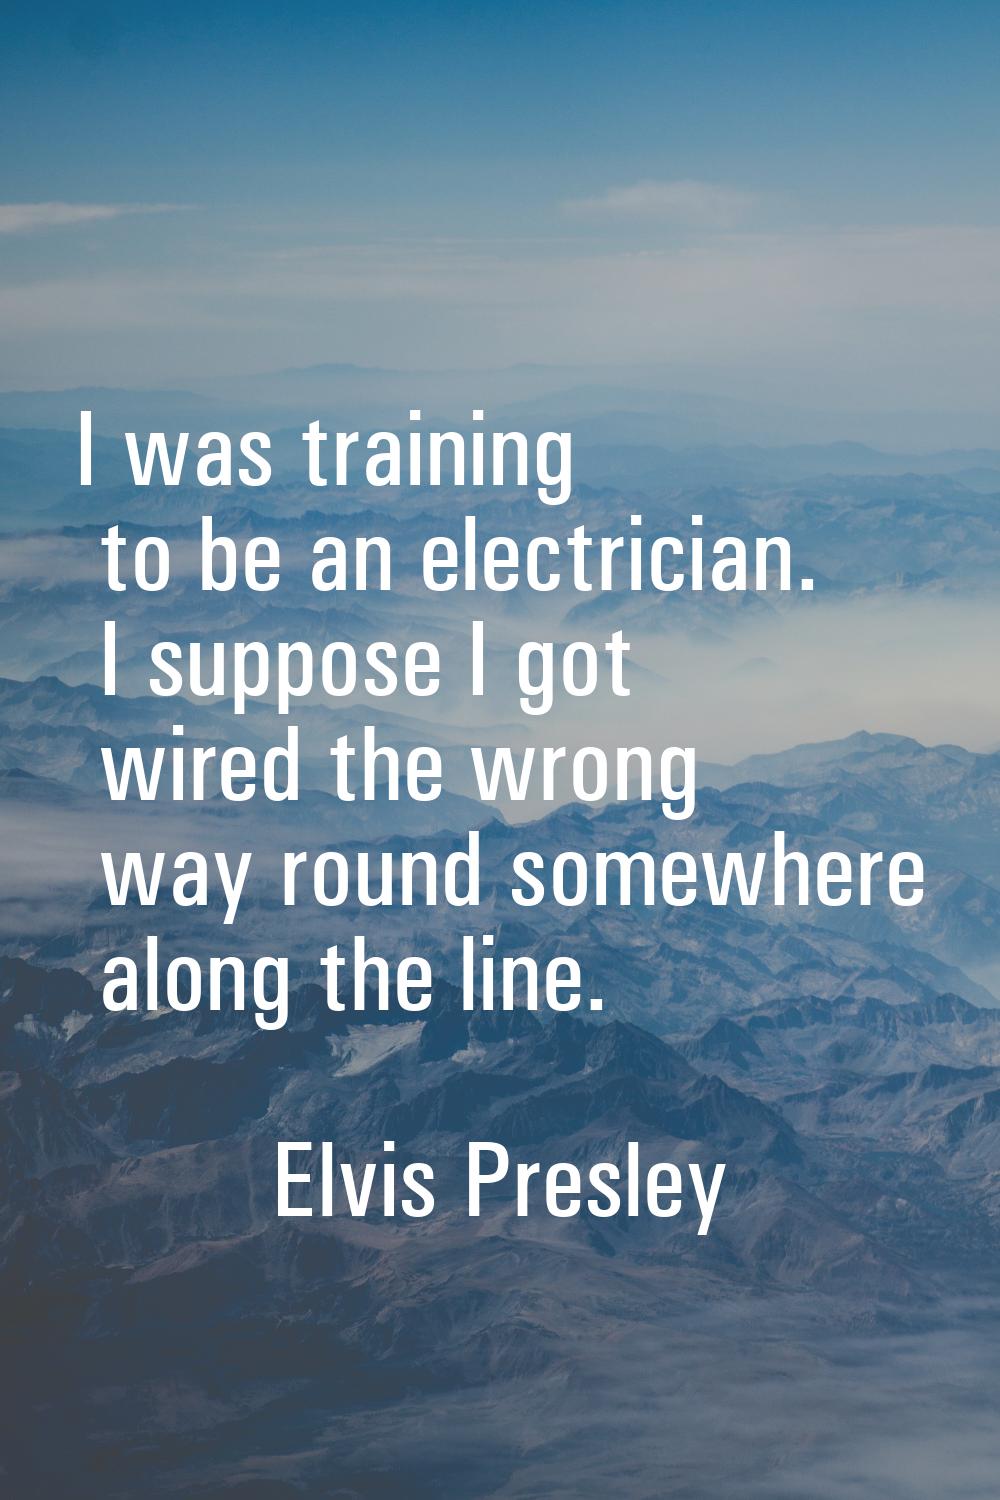 I was training to be an electrician. I suppose I got wired the wrong way round somewhere along the 